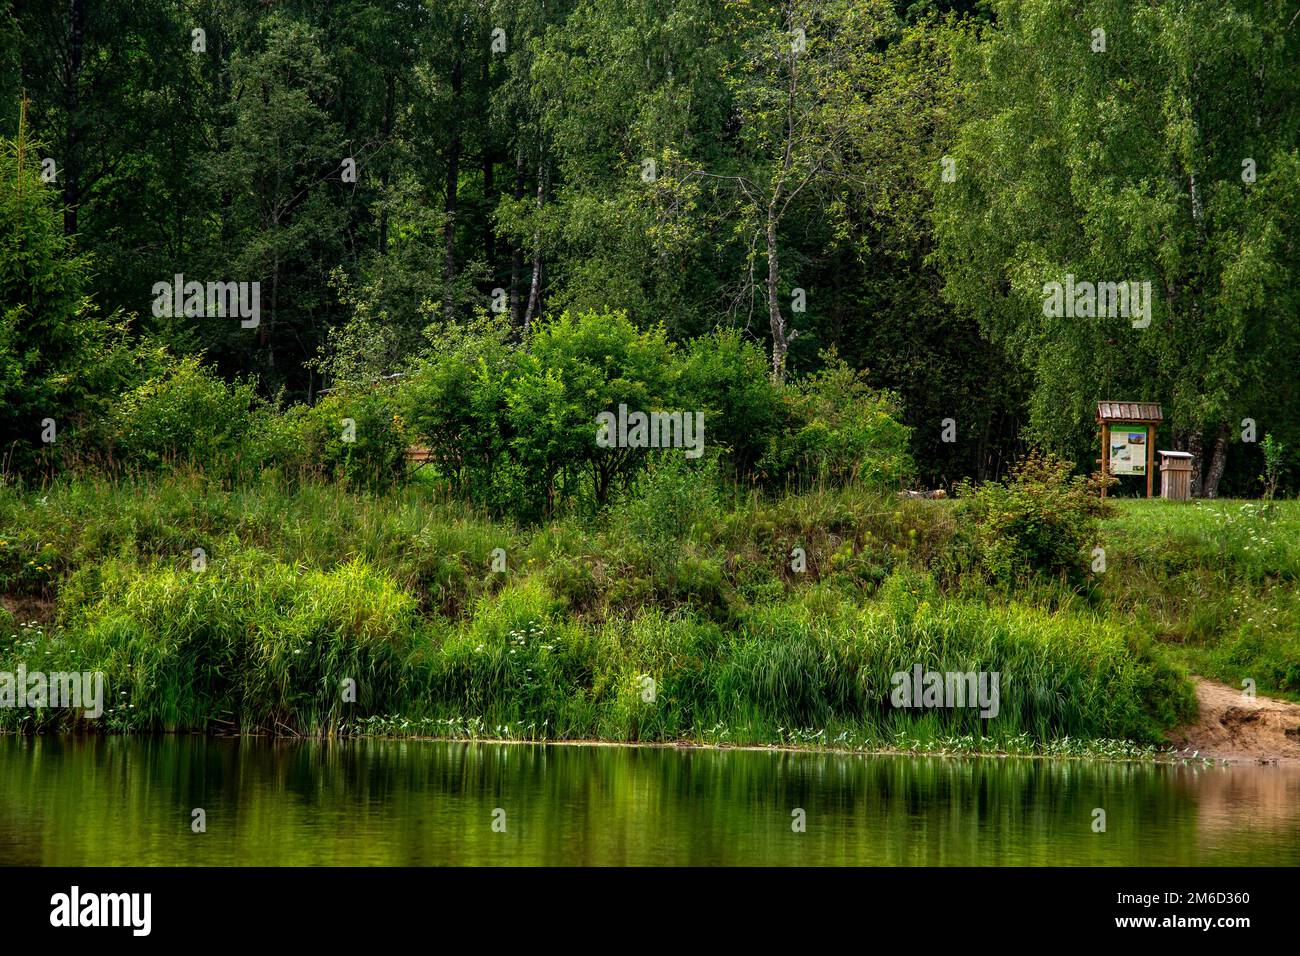 Green grass and forest on the river bank. Stock Photo